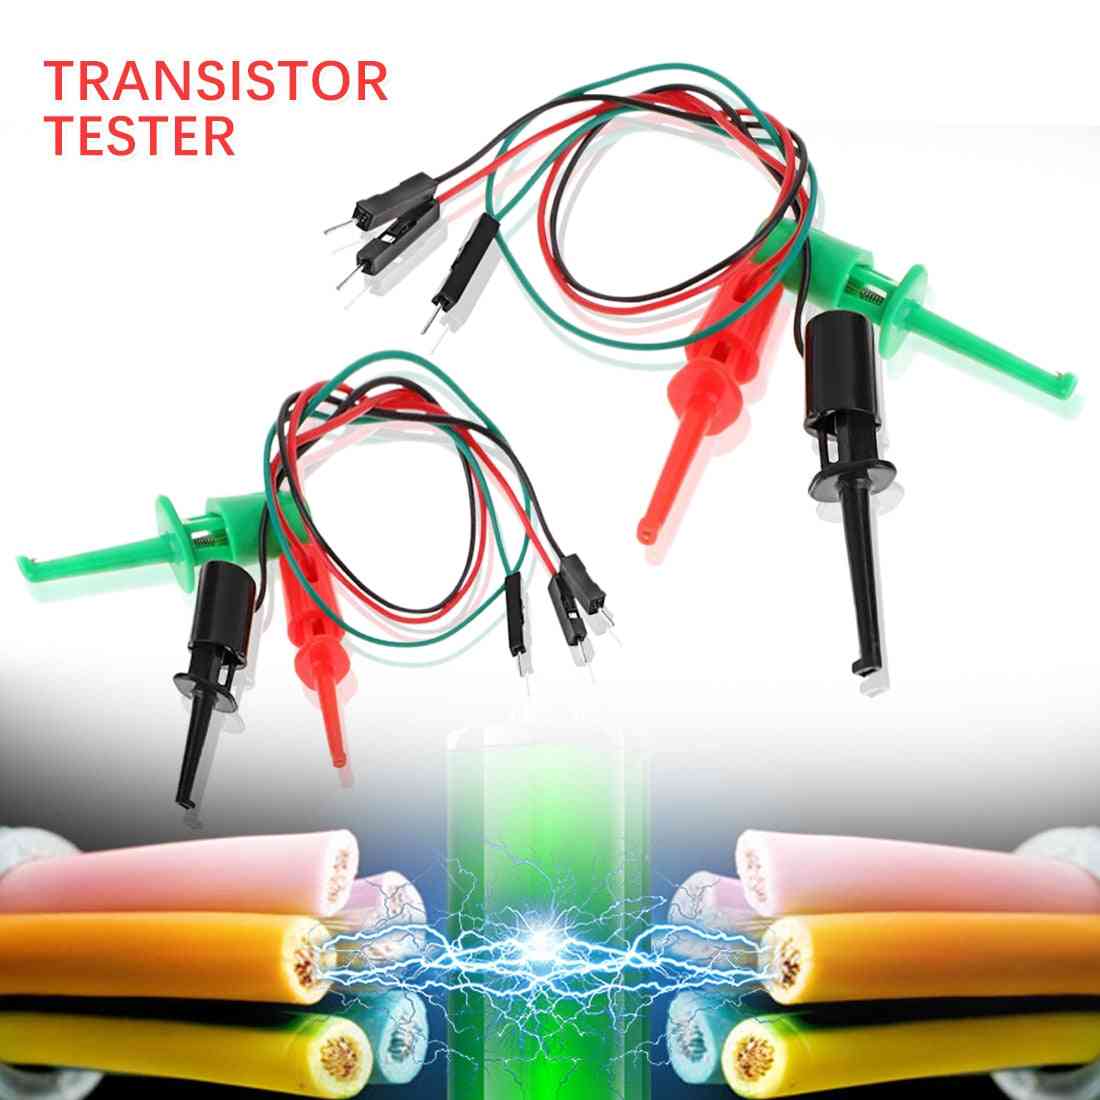 Test Hook With Male Head Line Transistor Tester